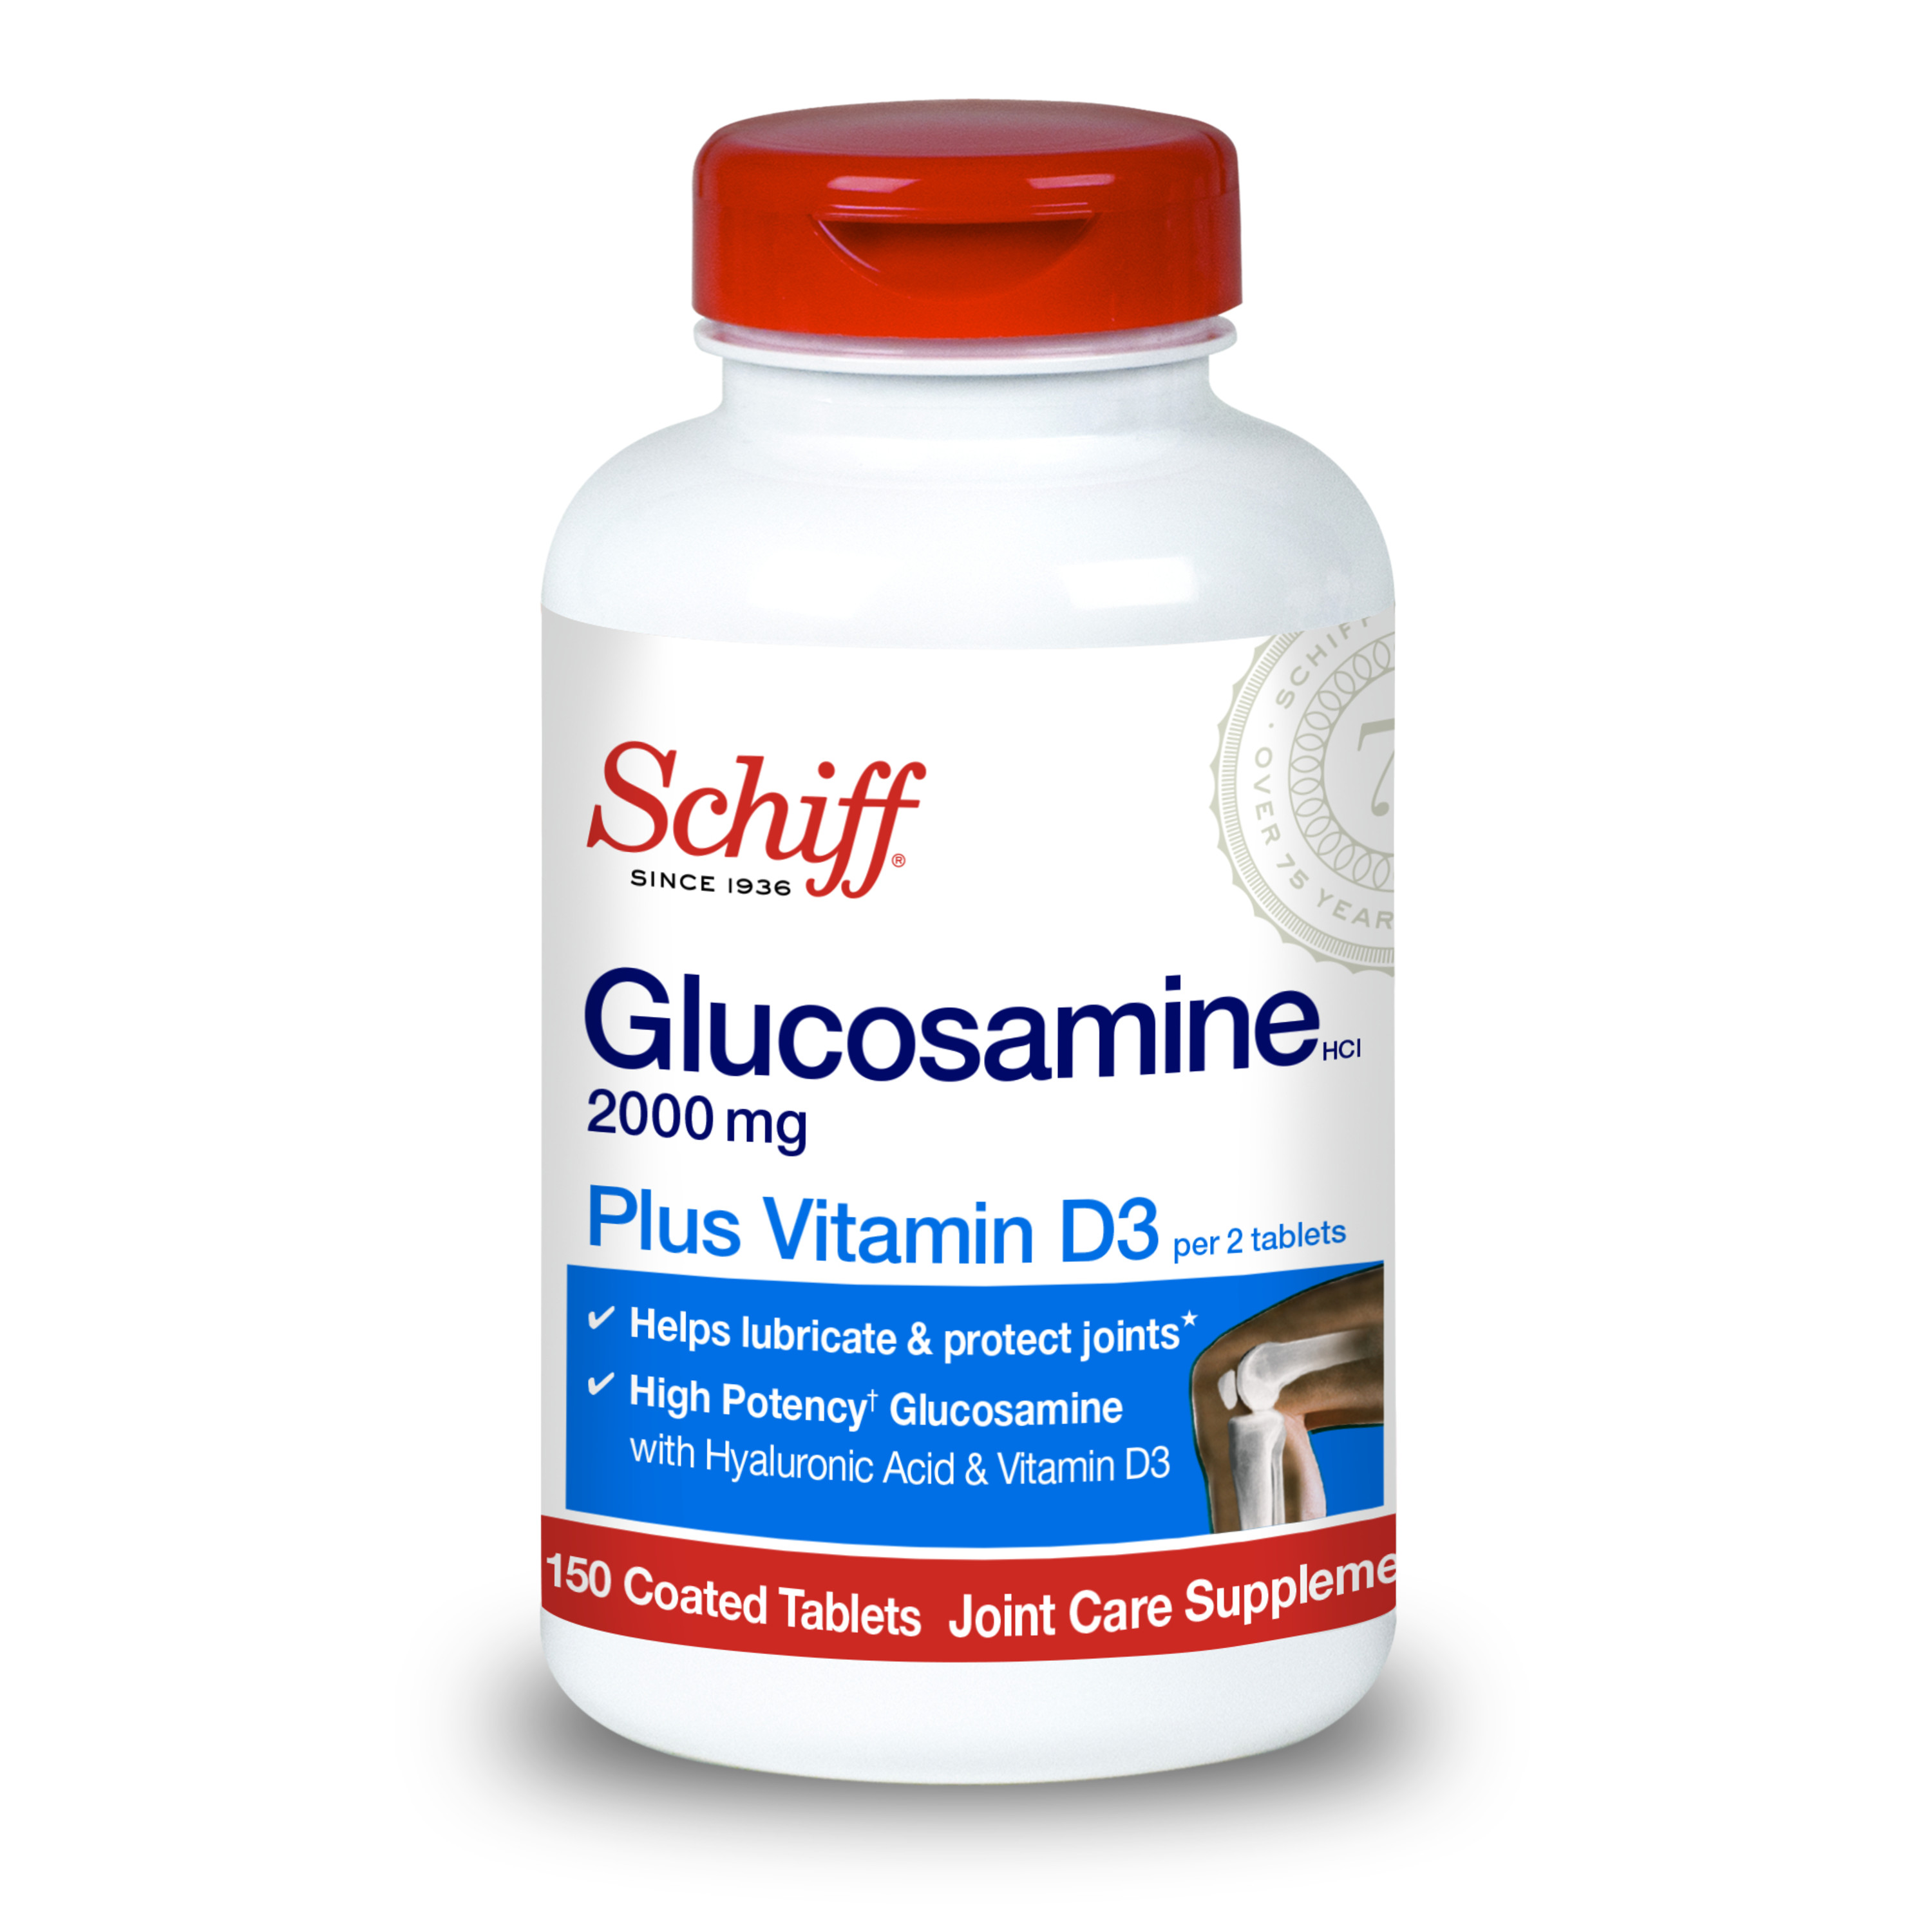 Schiff Glucosamine 2000mg with Vitamin D3 and Hyaluronic Acid, 150 tablets - Joint Supplement - image 2 of 2